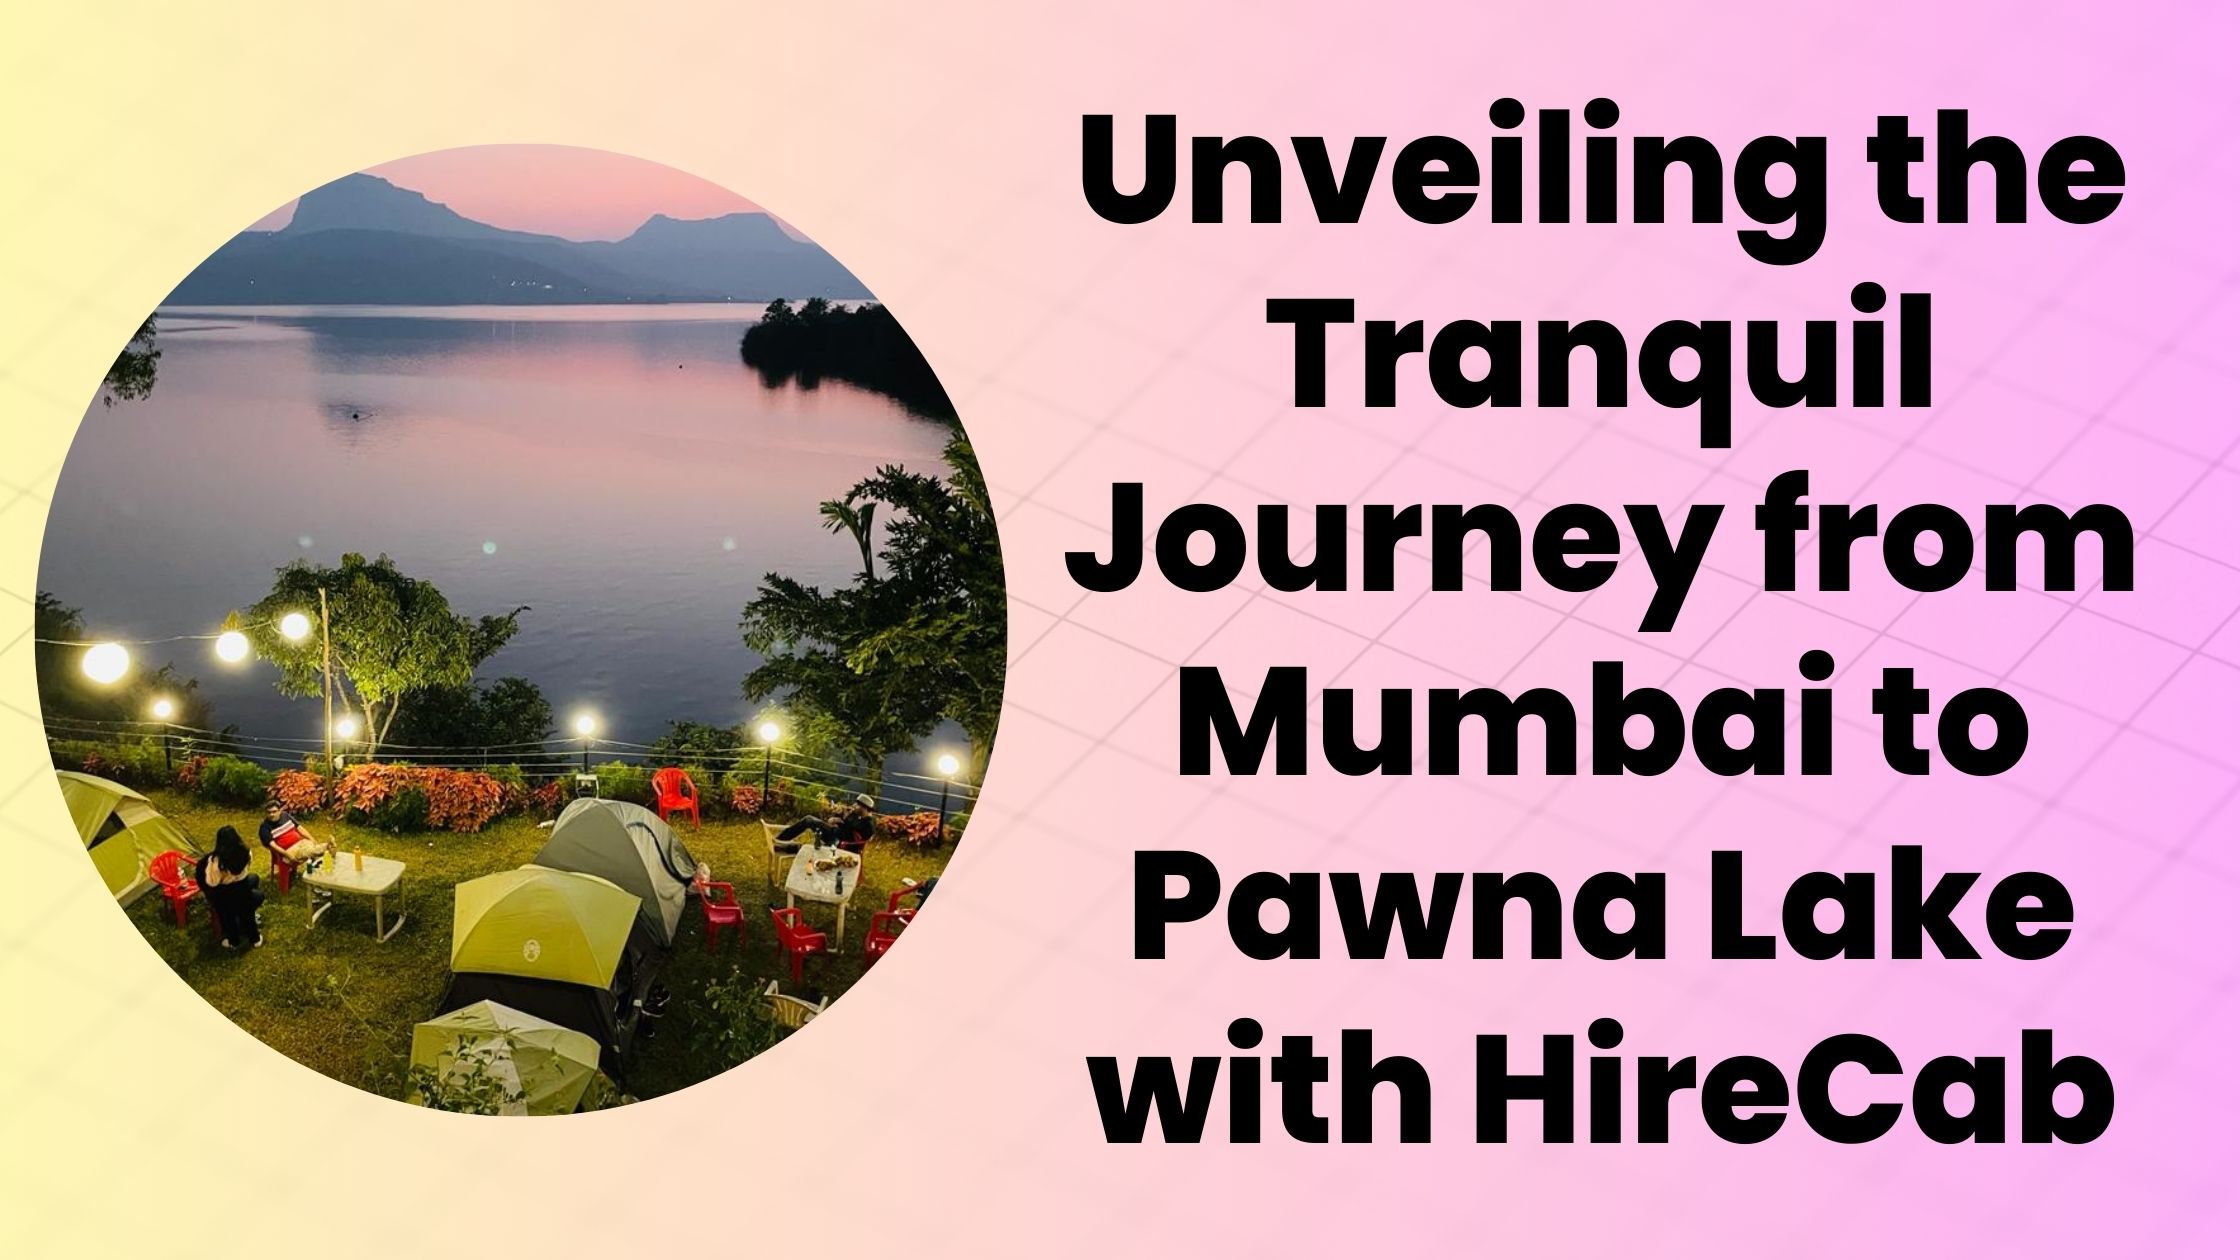 Unveiling the Tranquil Journey from Mumbai to Pawna Lake with HireCab